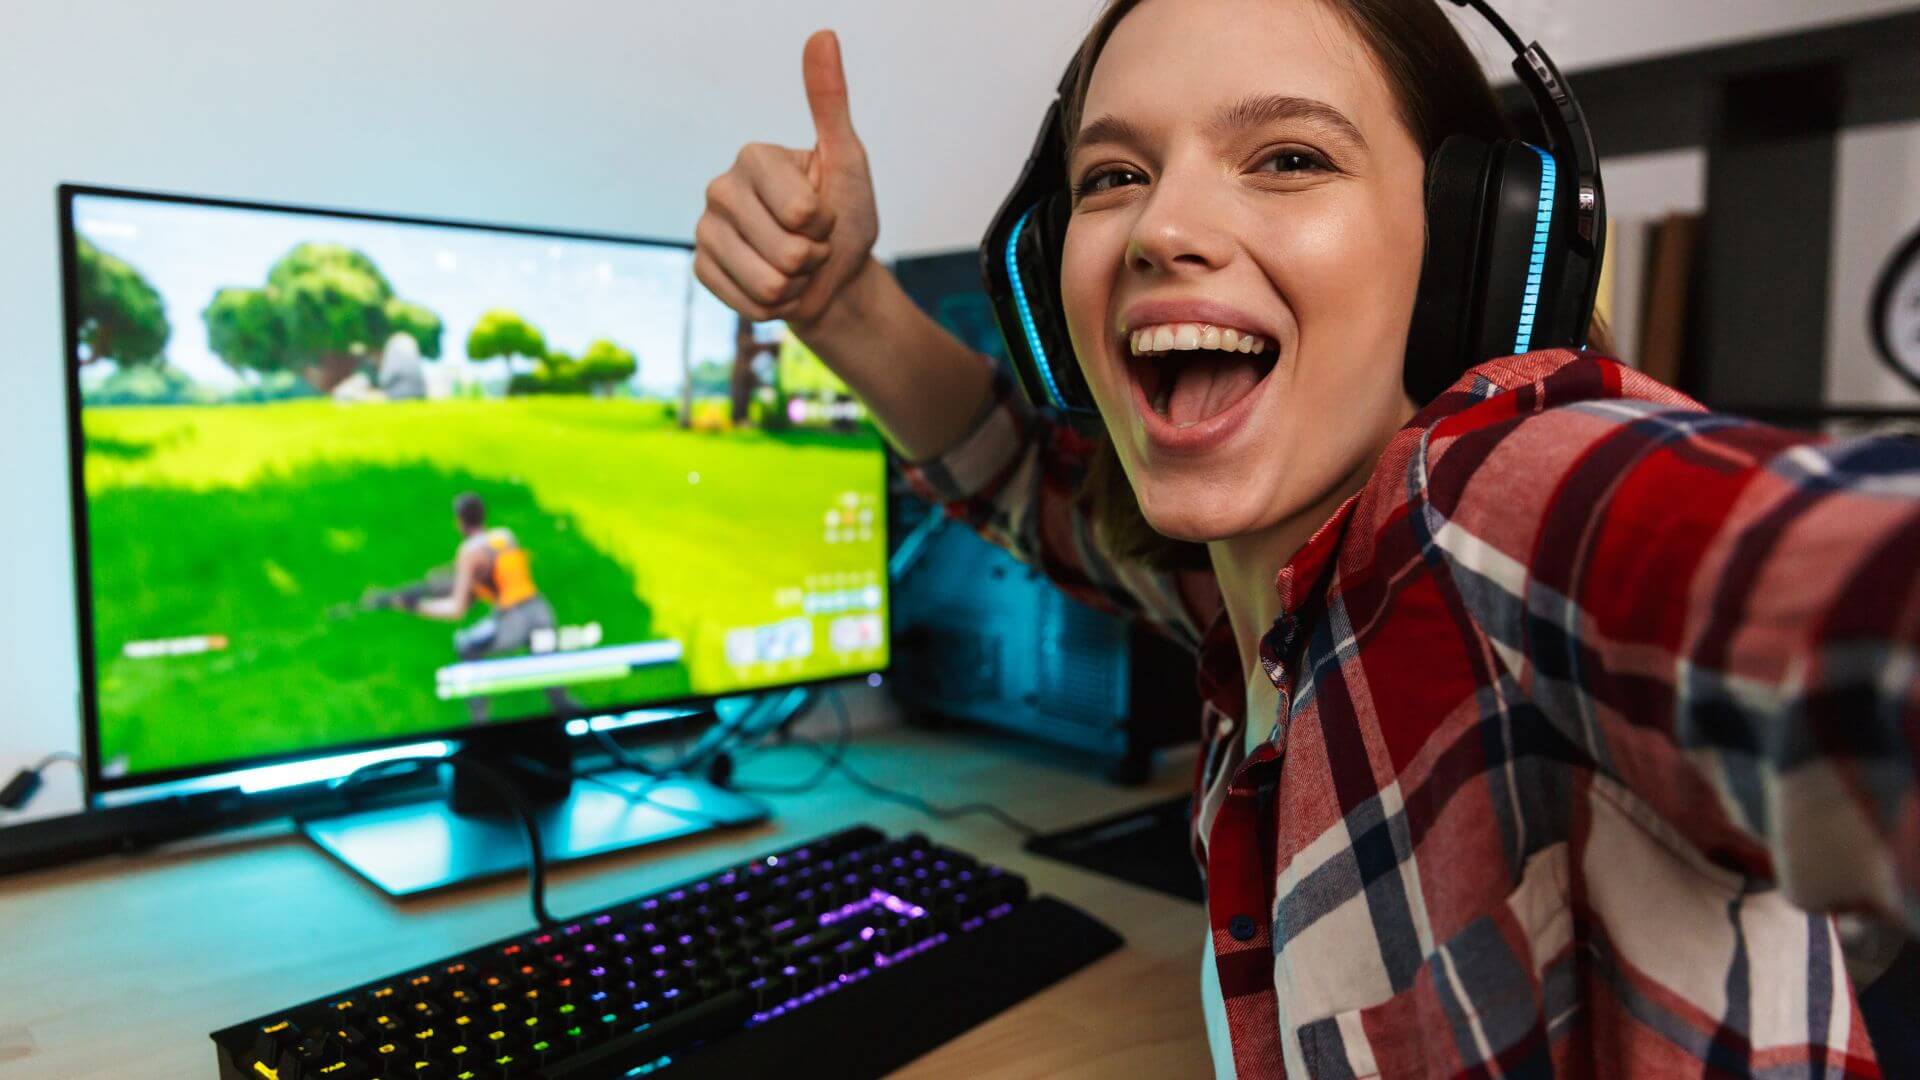 Explore Your Streaming Personality: 4 Top Twitch Streamer Personas To  Consider